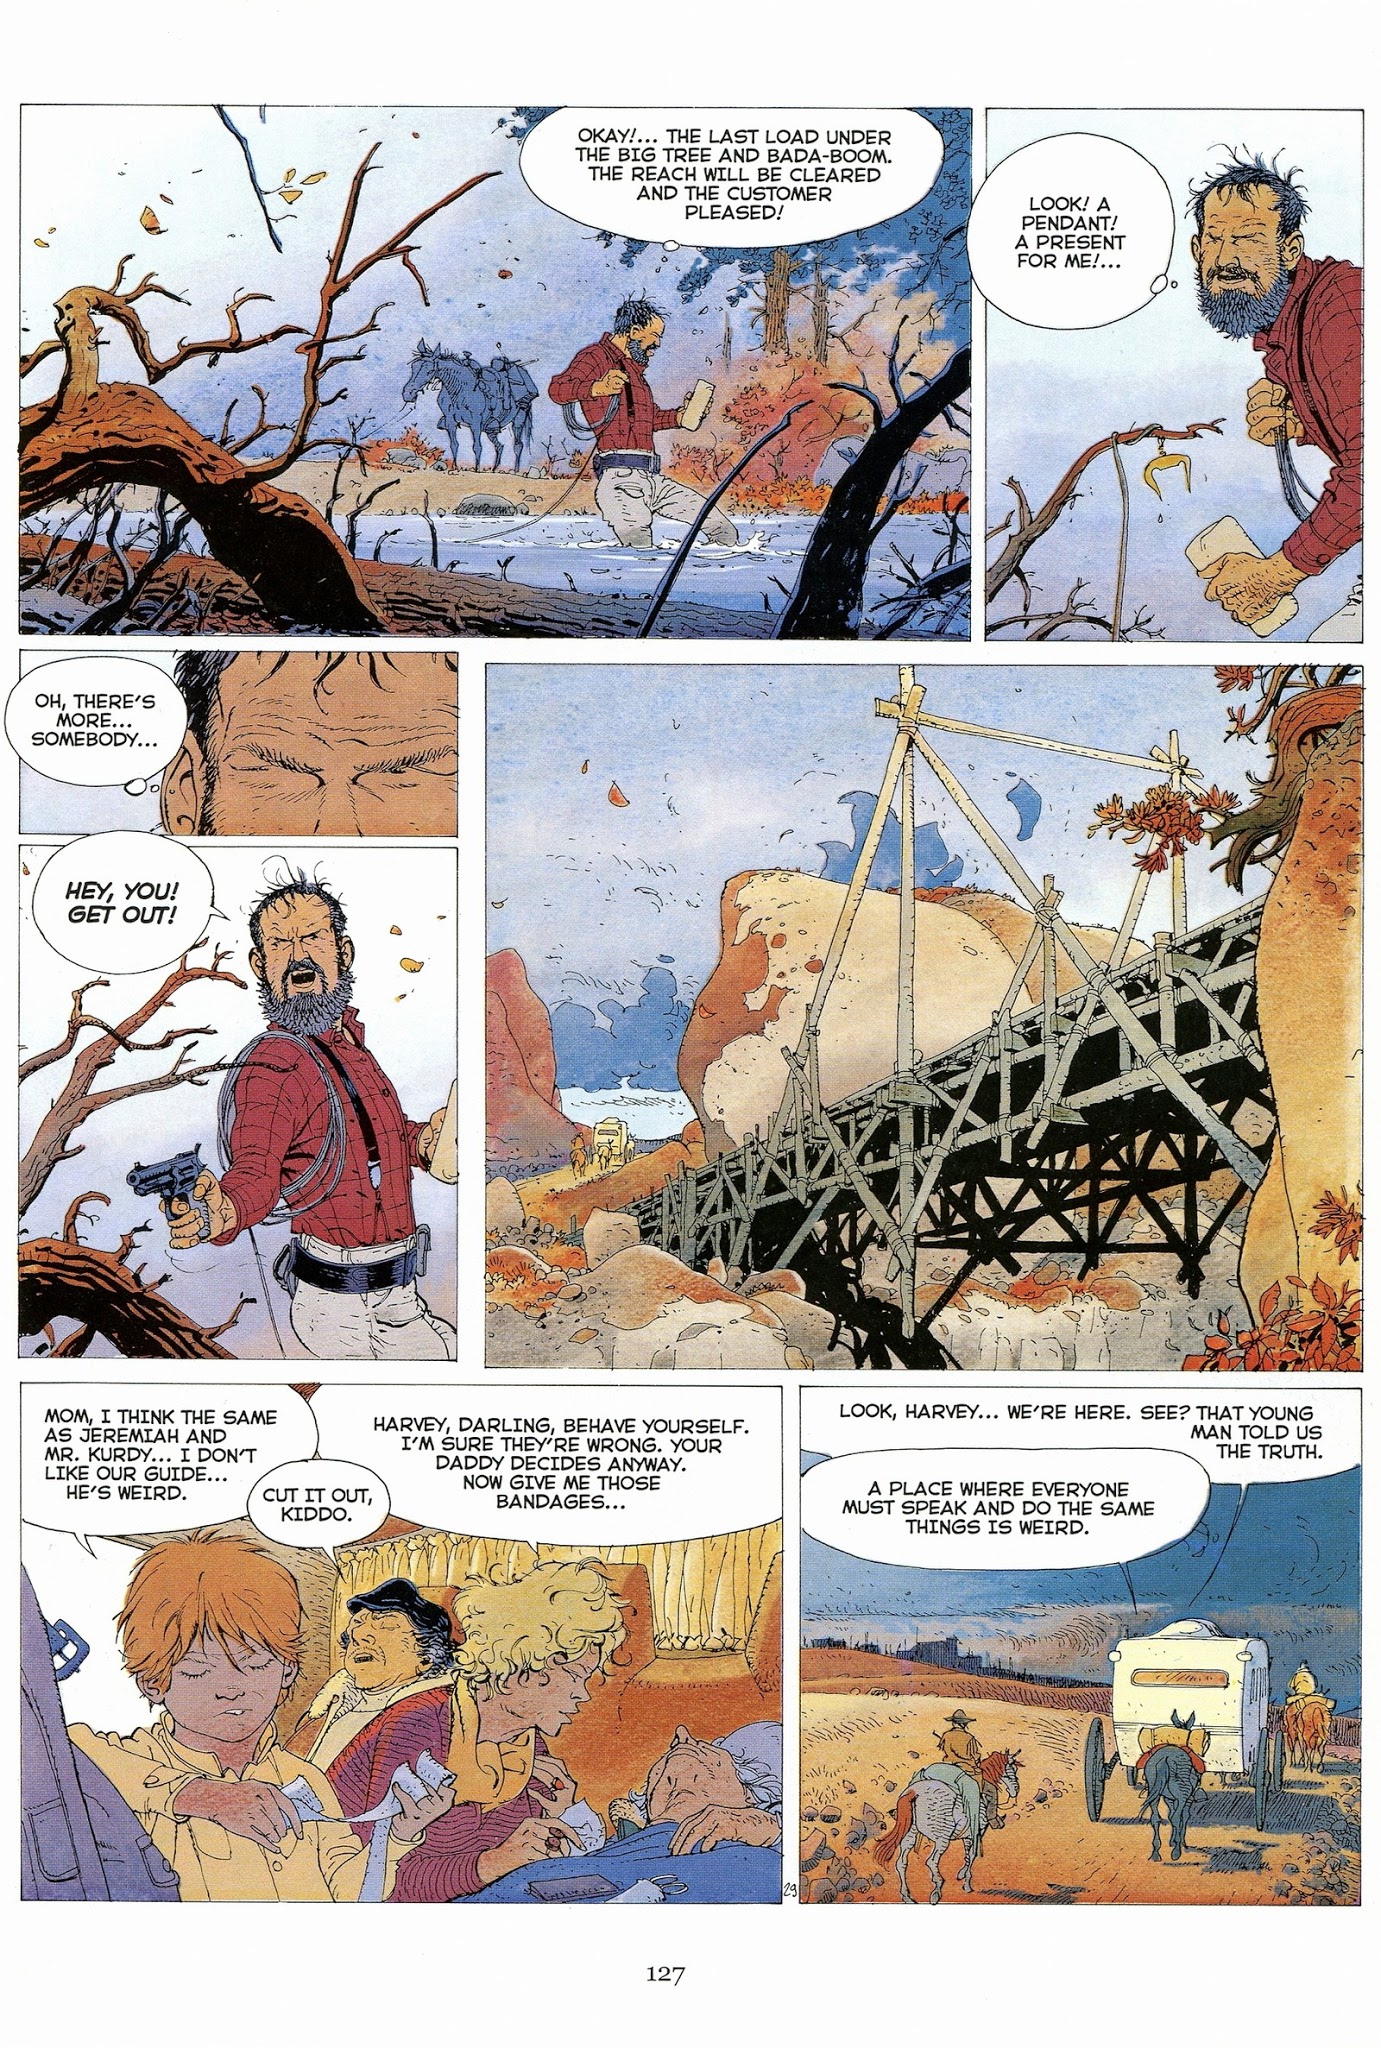 Read online Jeremiah by Hermann comic -  Issue # TPB 2 - 128